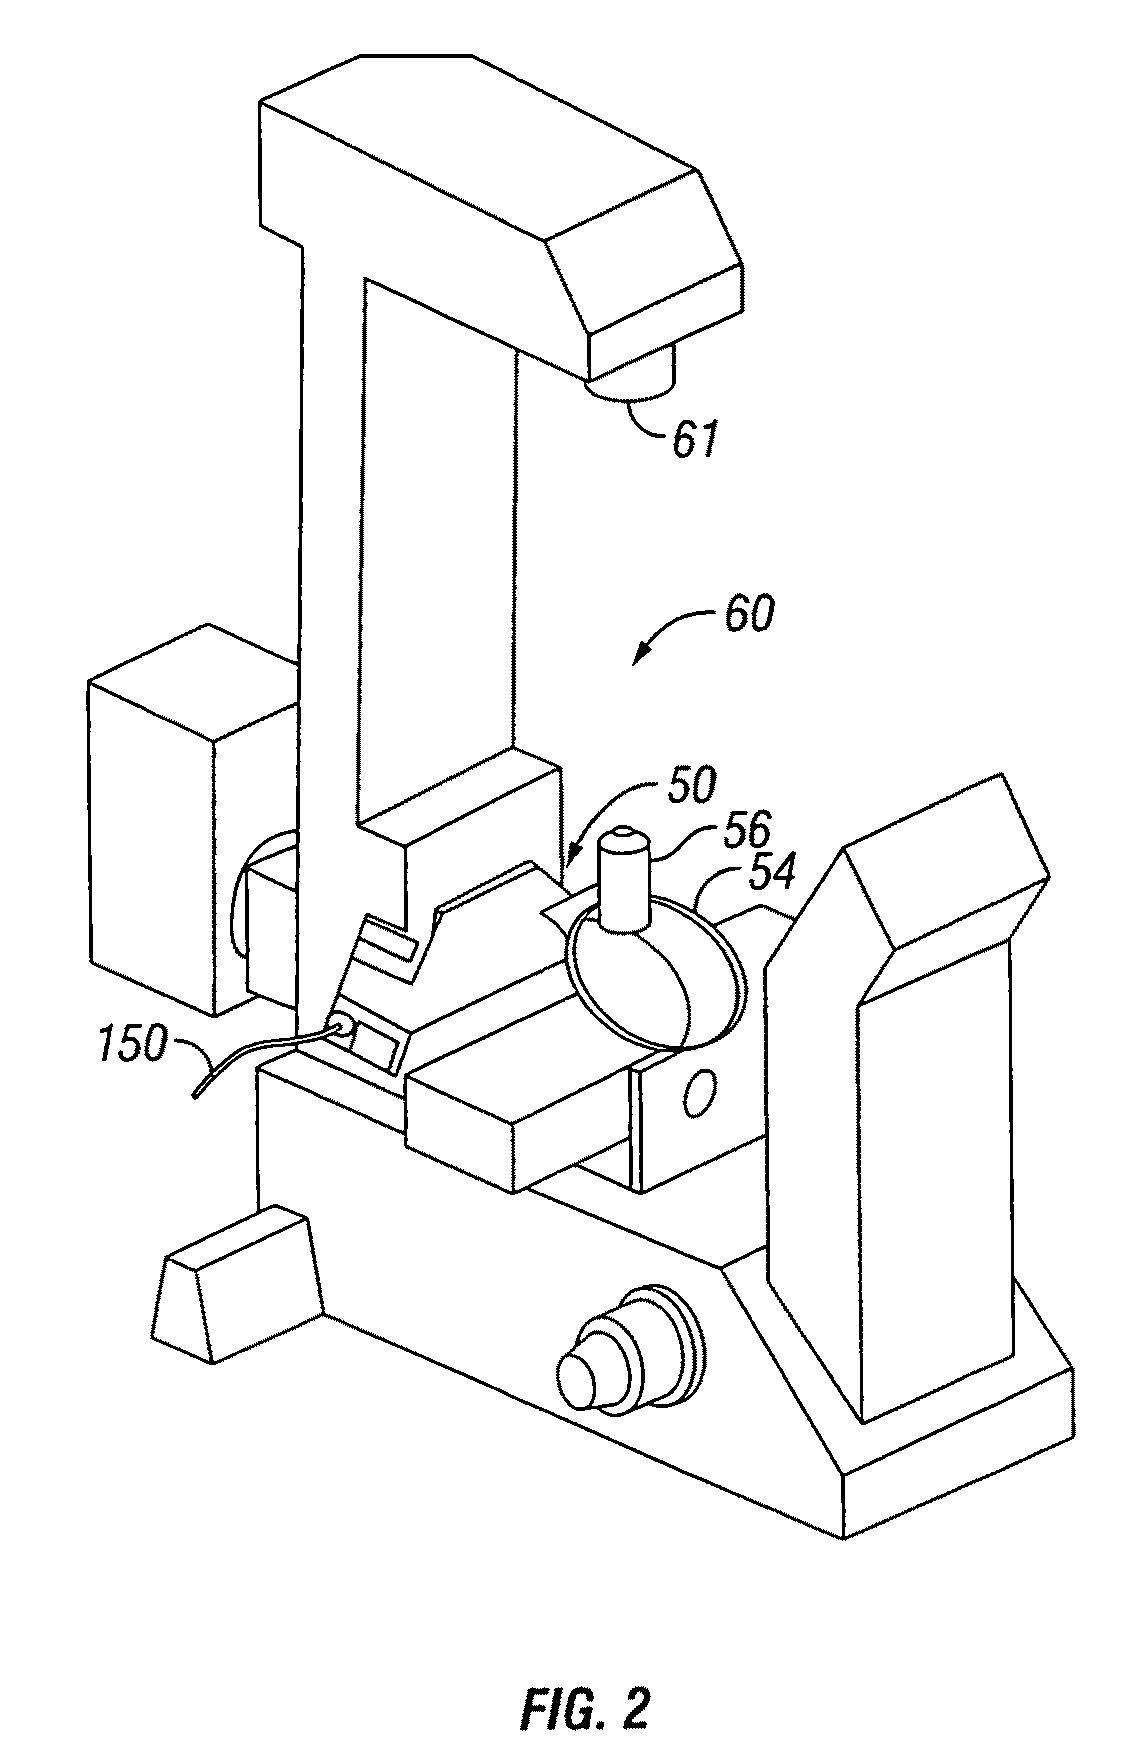 System and method for manipulating and processing materials using holographic optical trapping